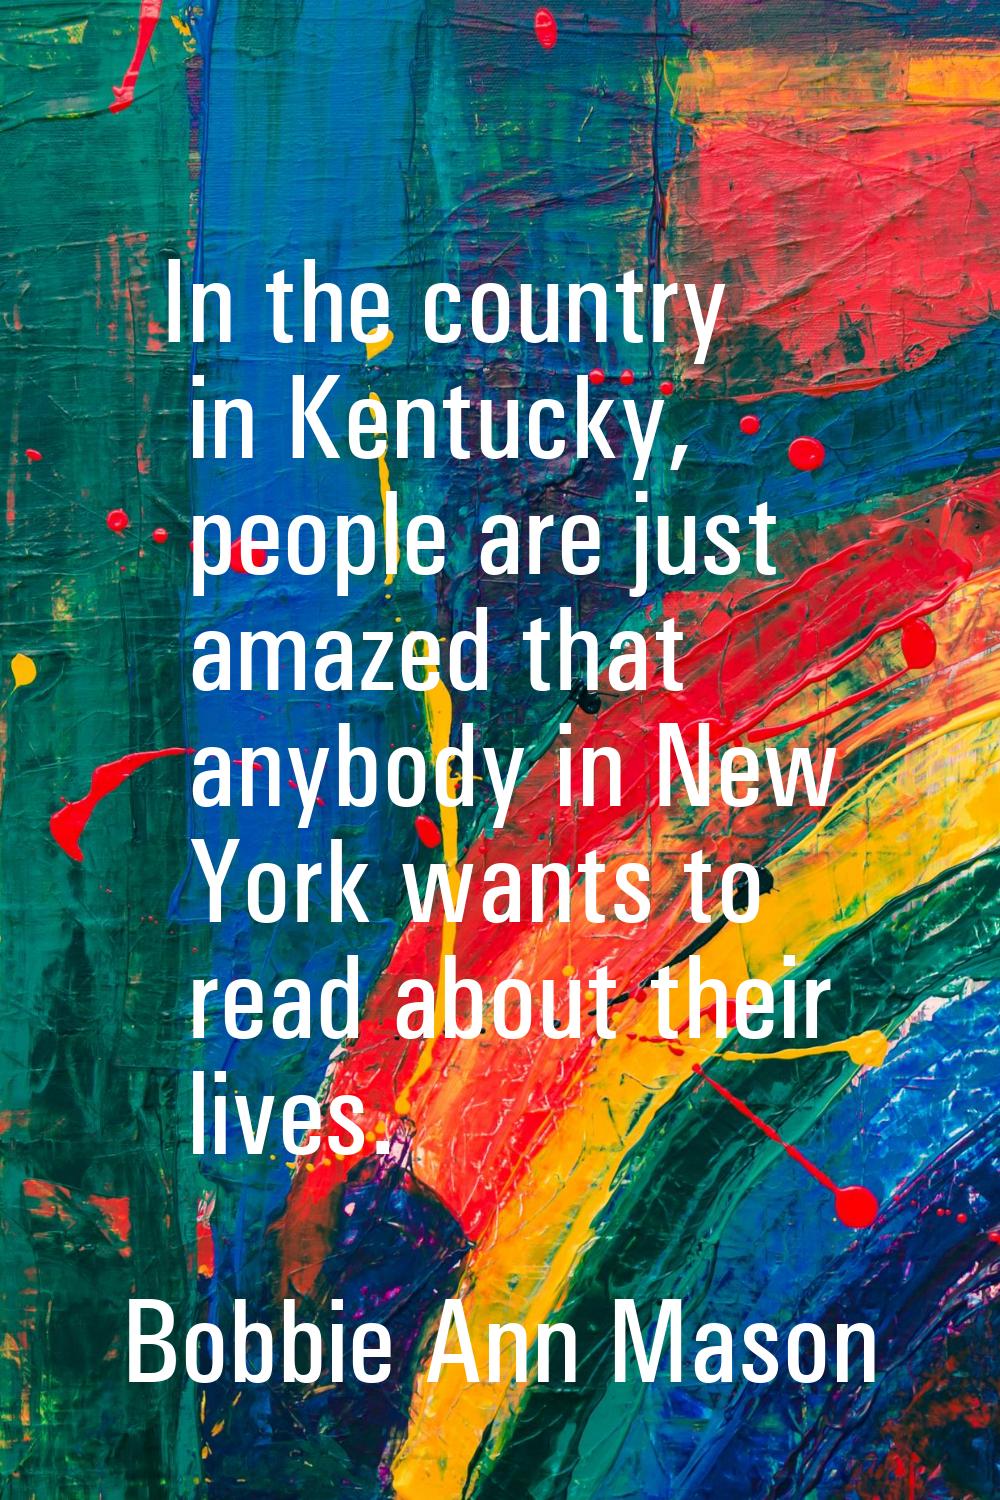 In the country in Kentucky, people are just amazed that anybody in New York wants to read about the